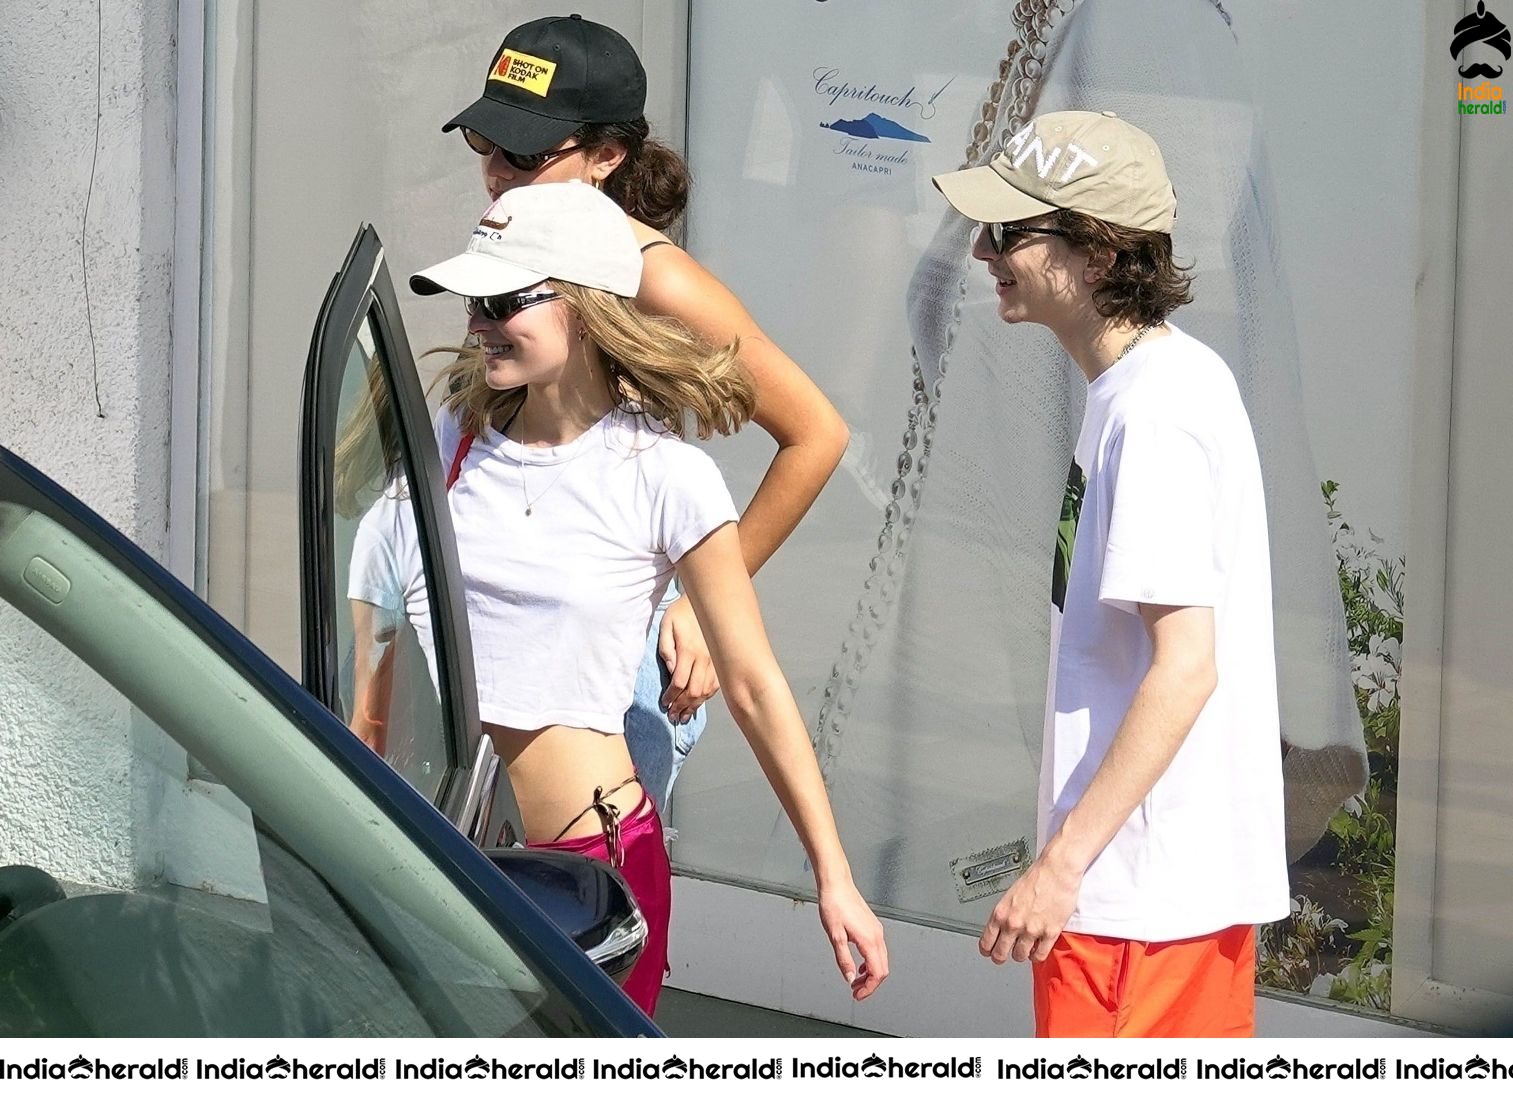 Johnny Depp Daughter Lily Rose Depp Caught in Bikini With her Boyfriend in a Boat Set 1